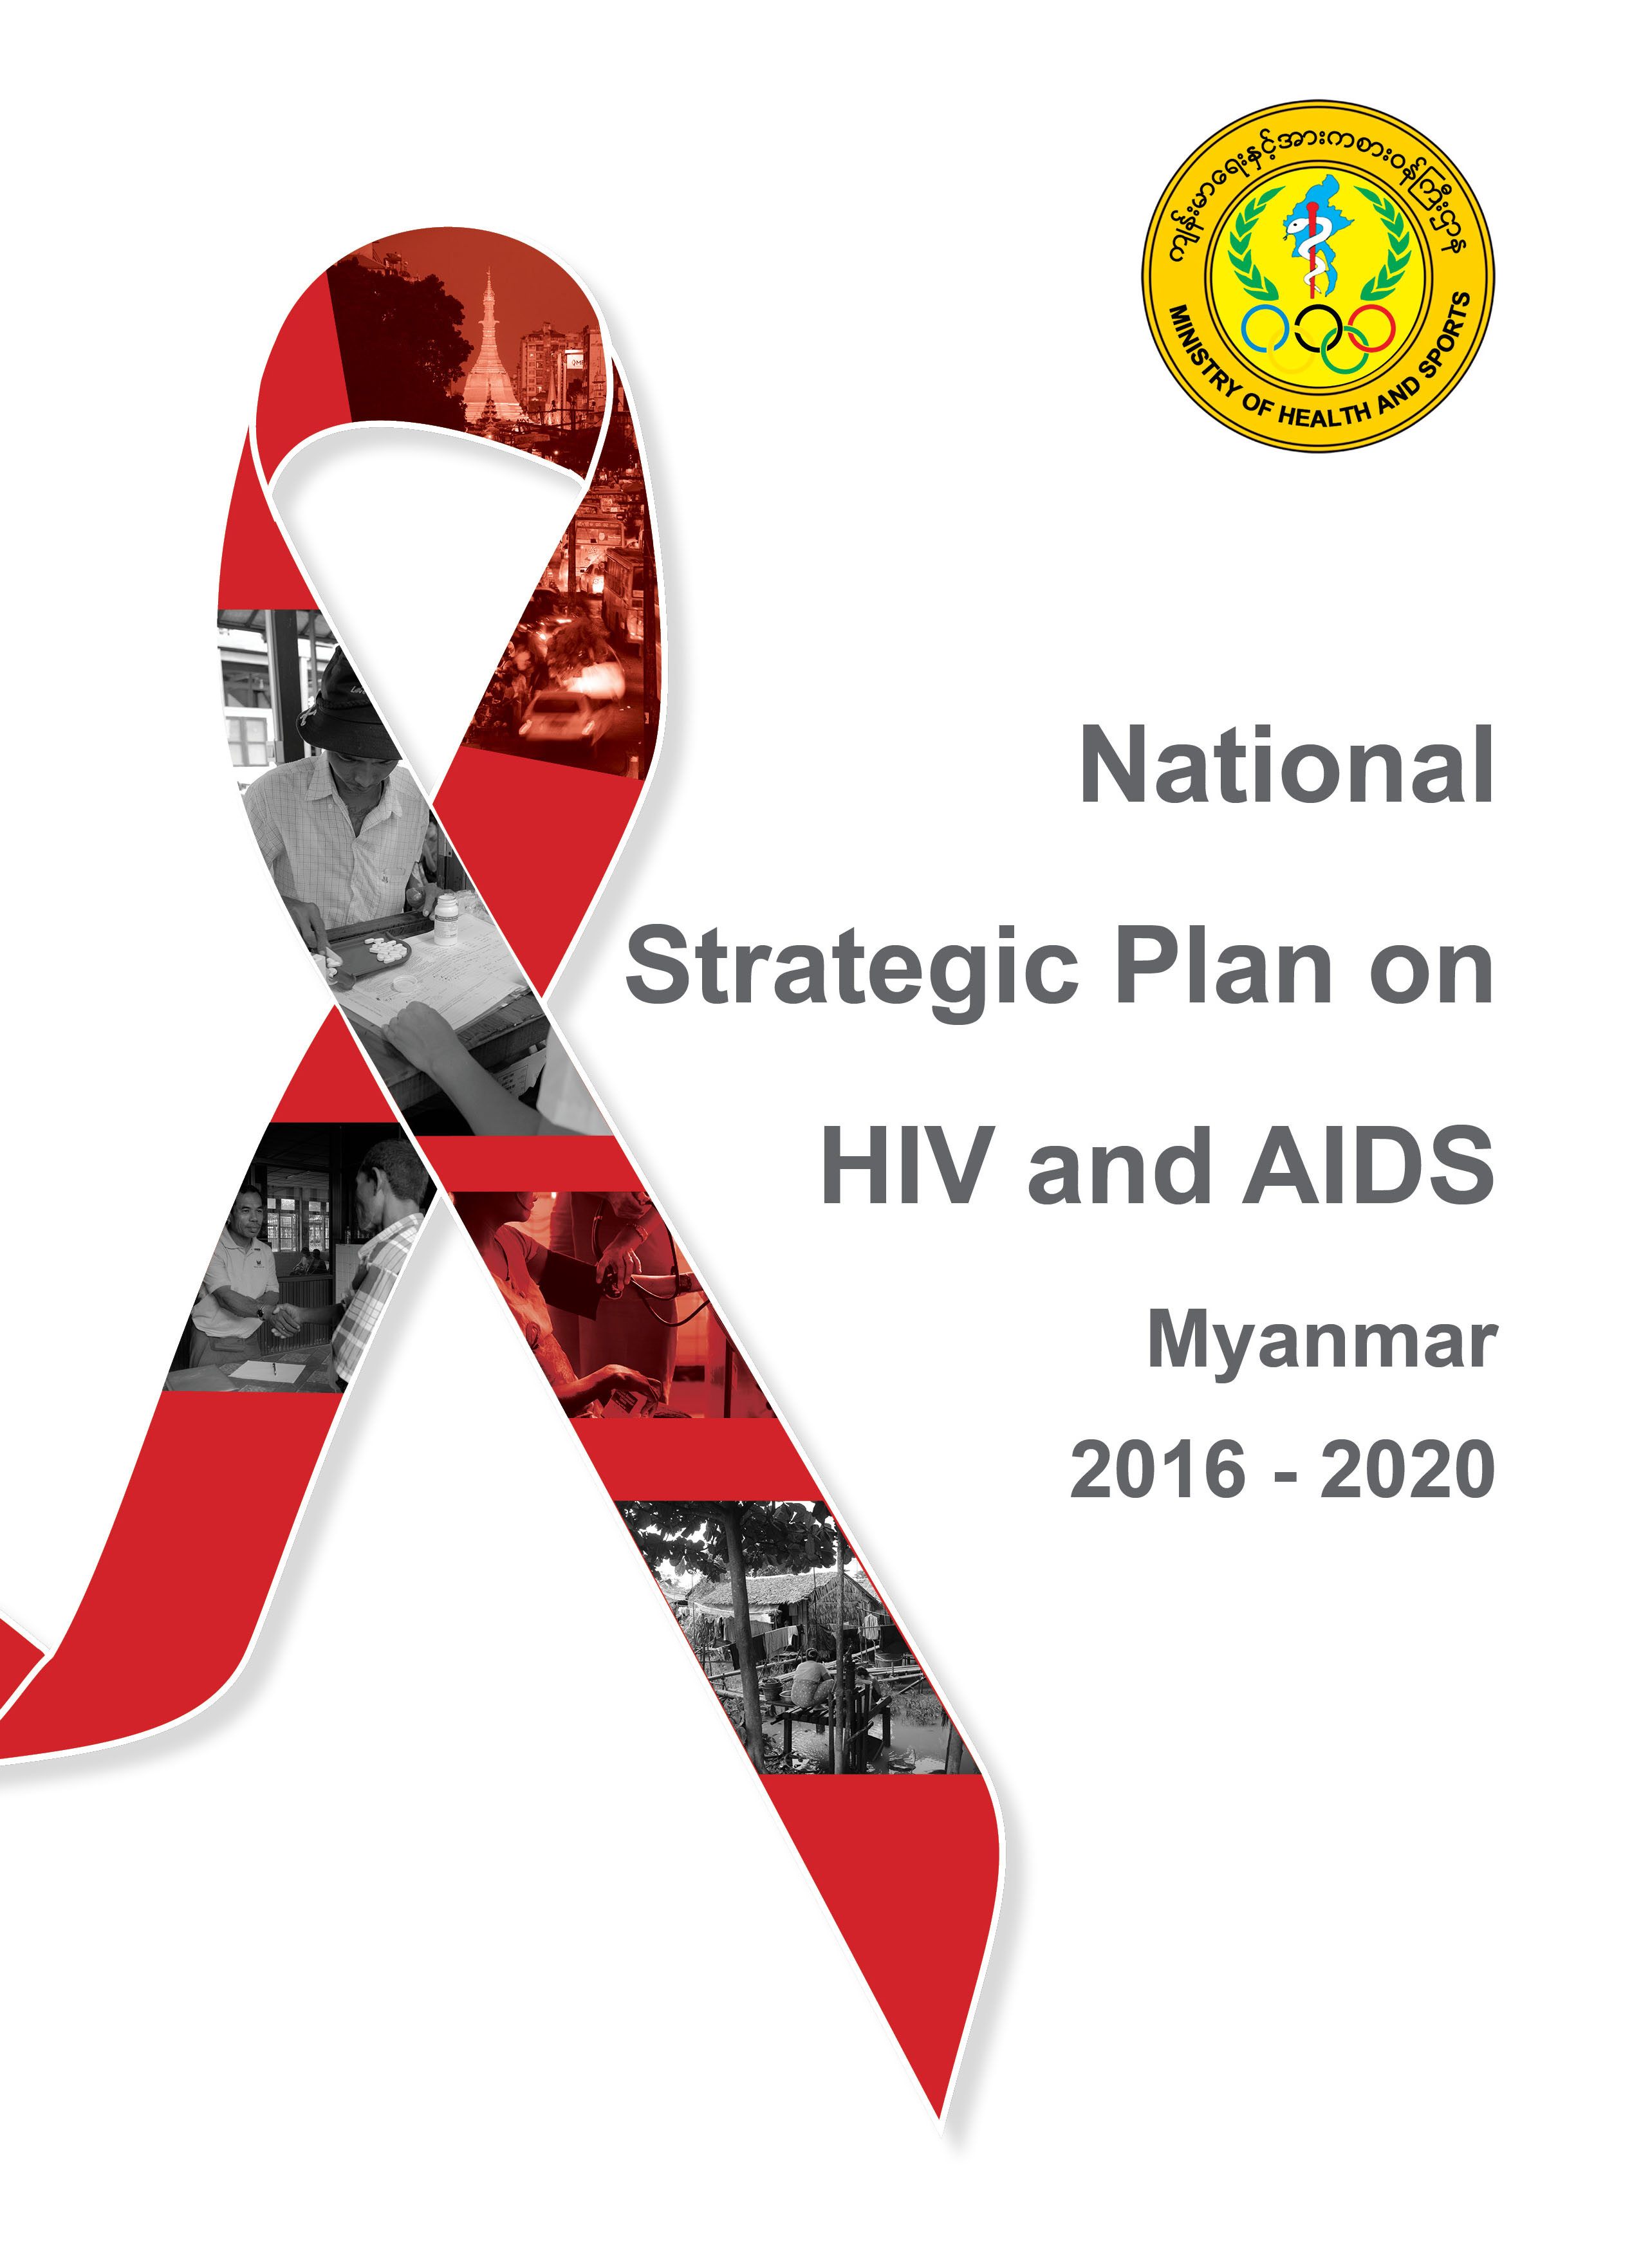 National strategic plan on HIV and AIDS, Myanmar 2016-2020 